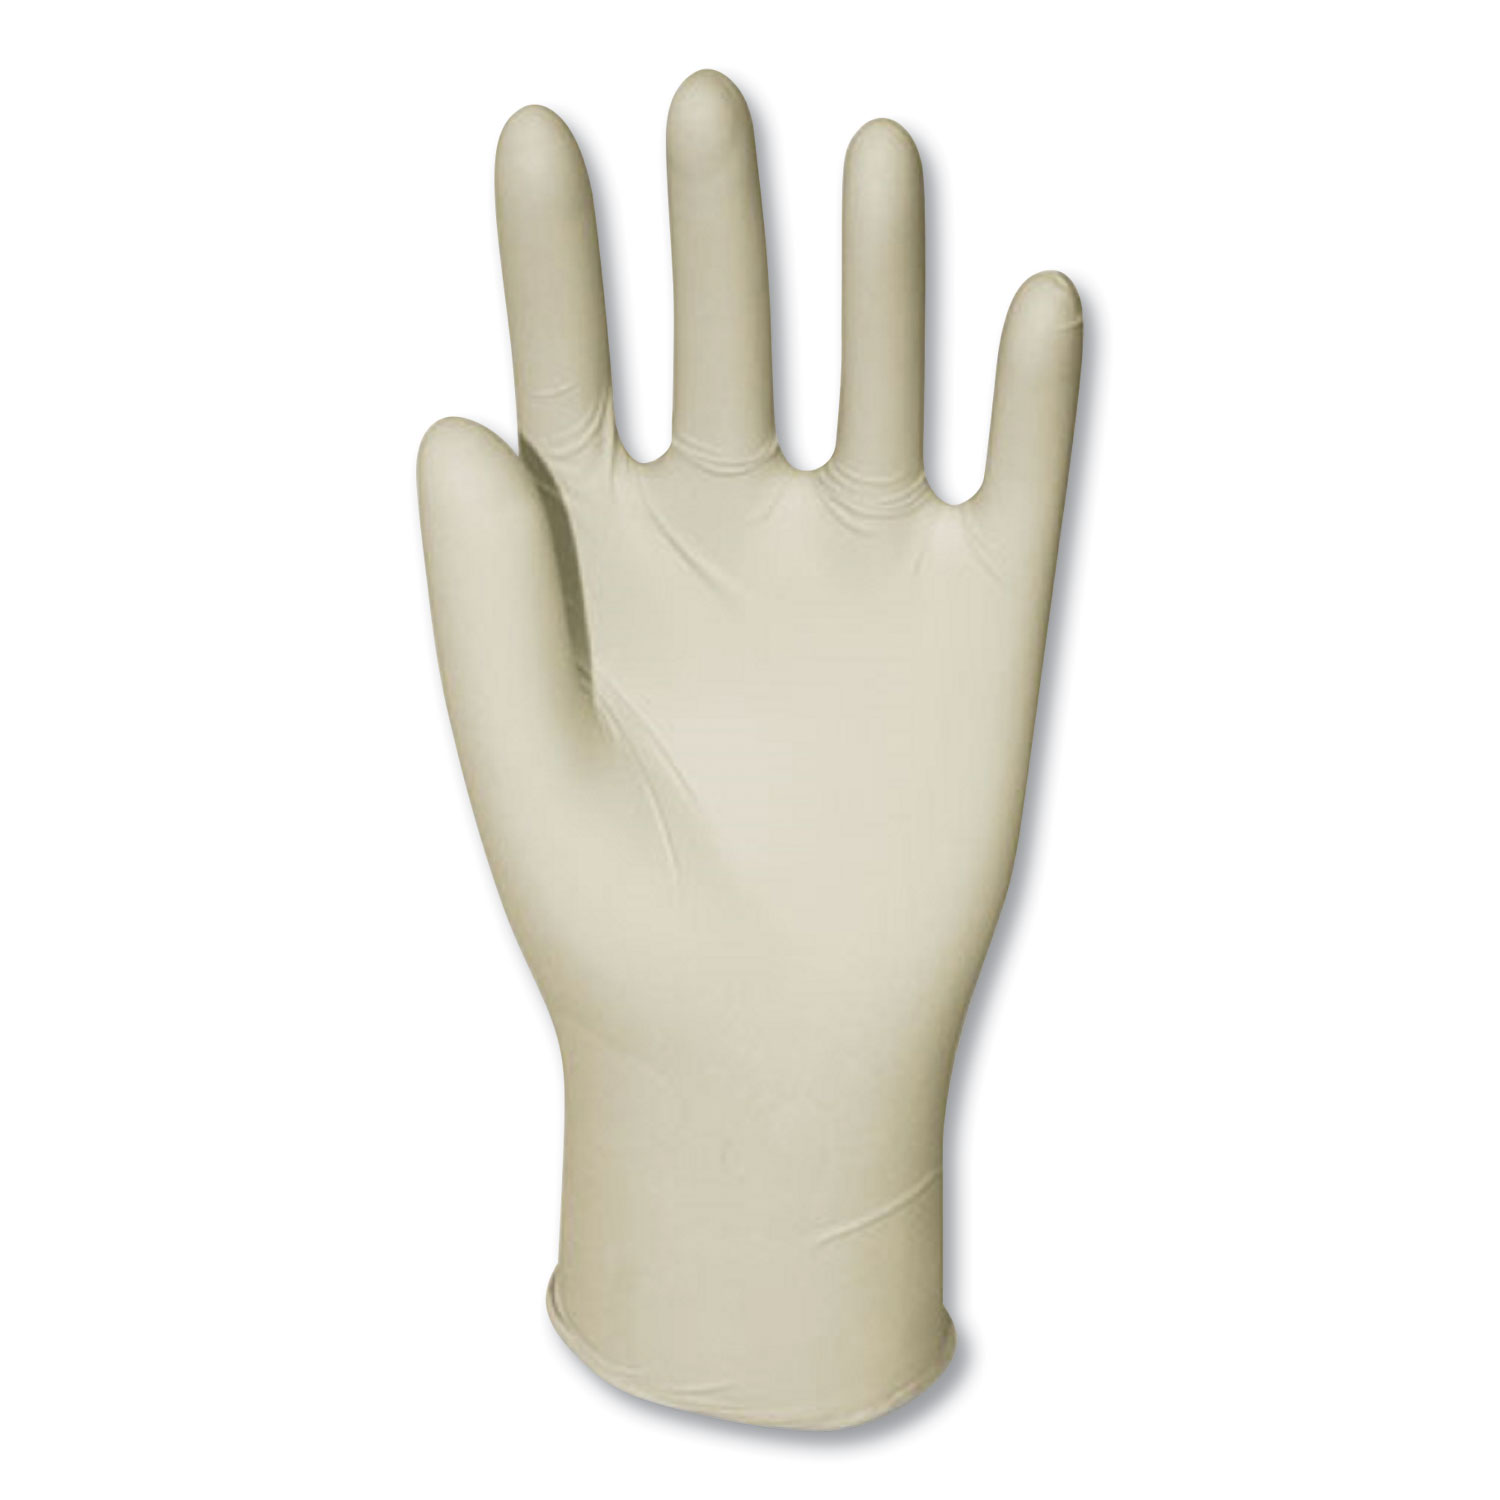  GN1 315LCT Powder-Free Synthetic Vinyl Gloves, Large, Cream, 1,000/Carton (GN1315LCT) 